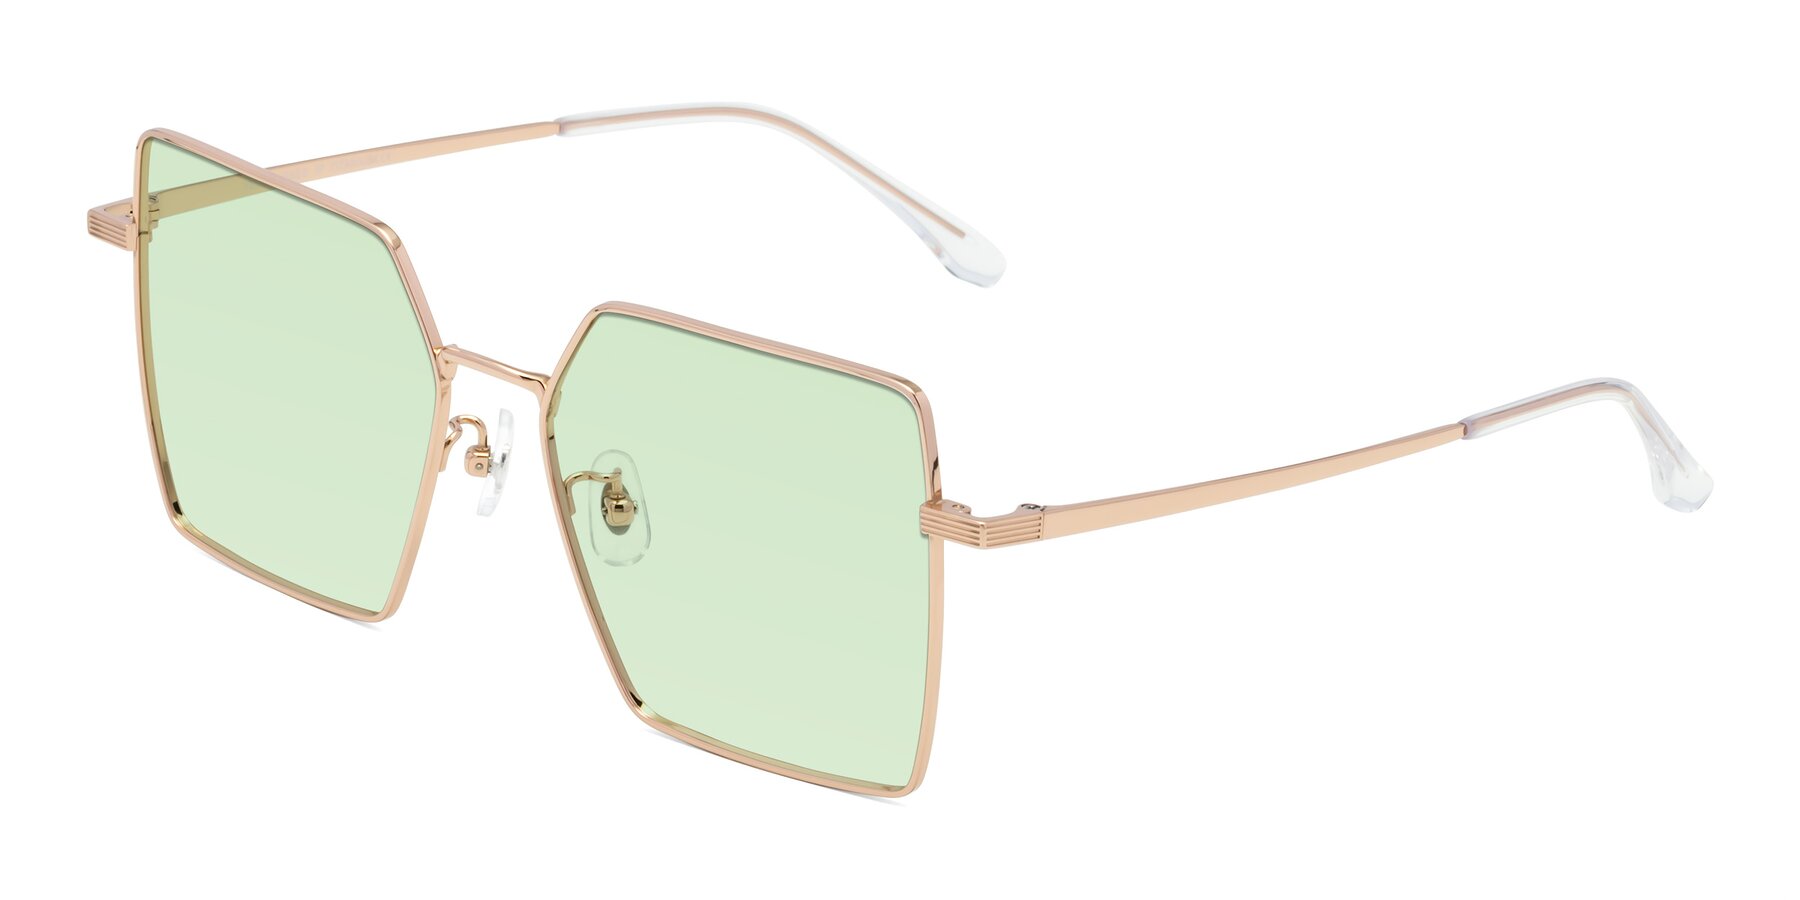 Angle of La Villa in Rose Gold with Light Green Tinted Lenses